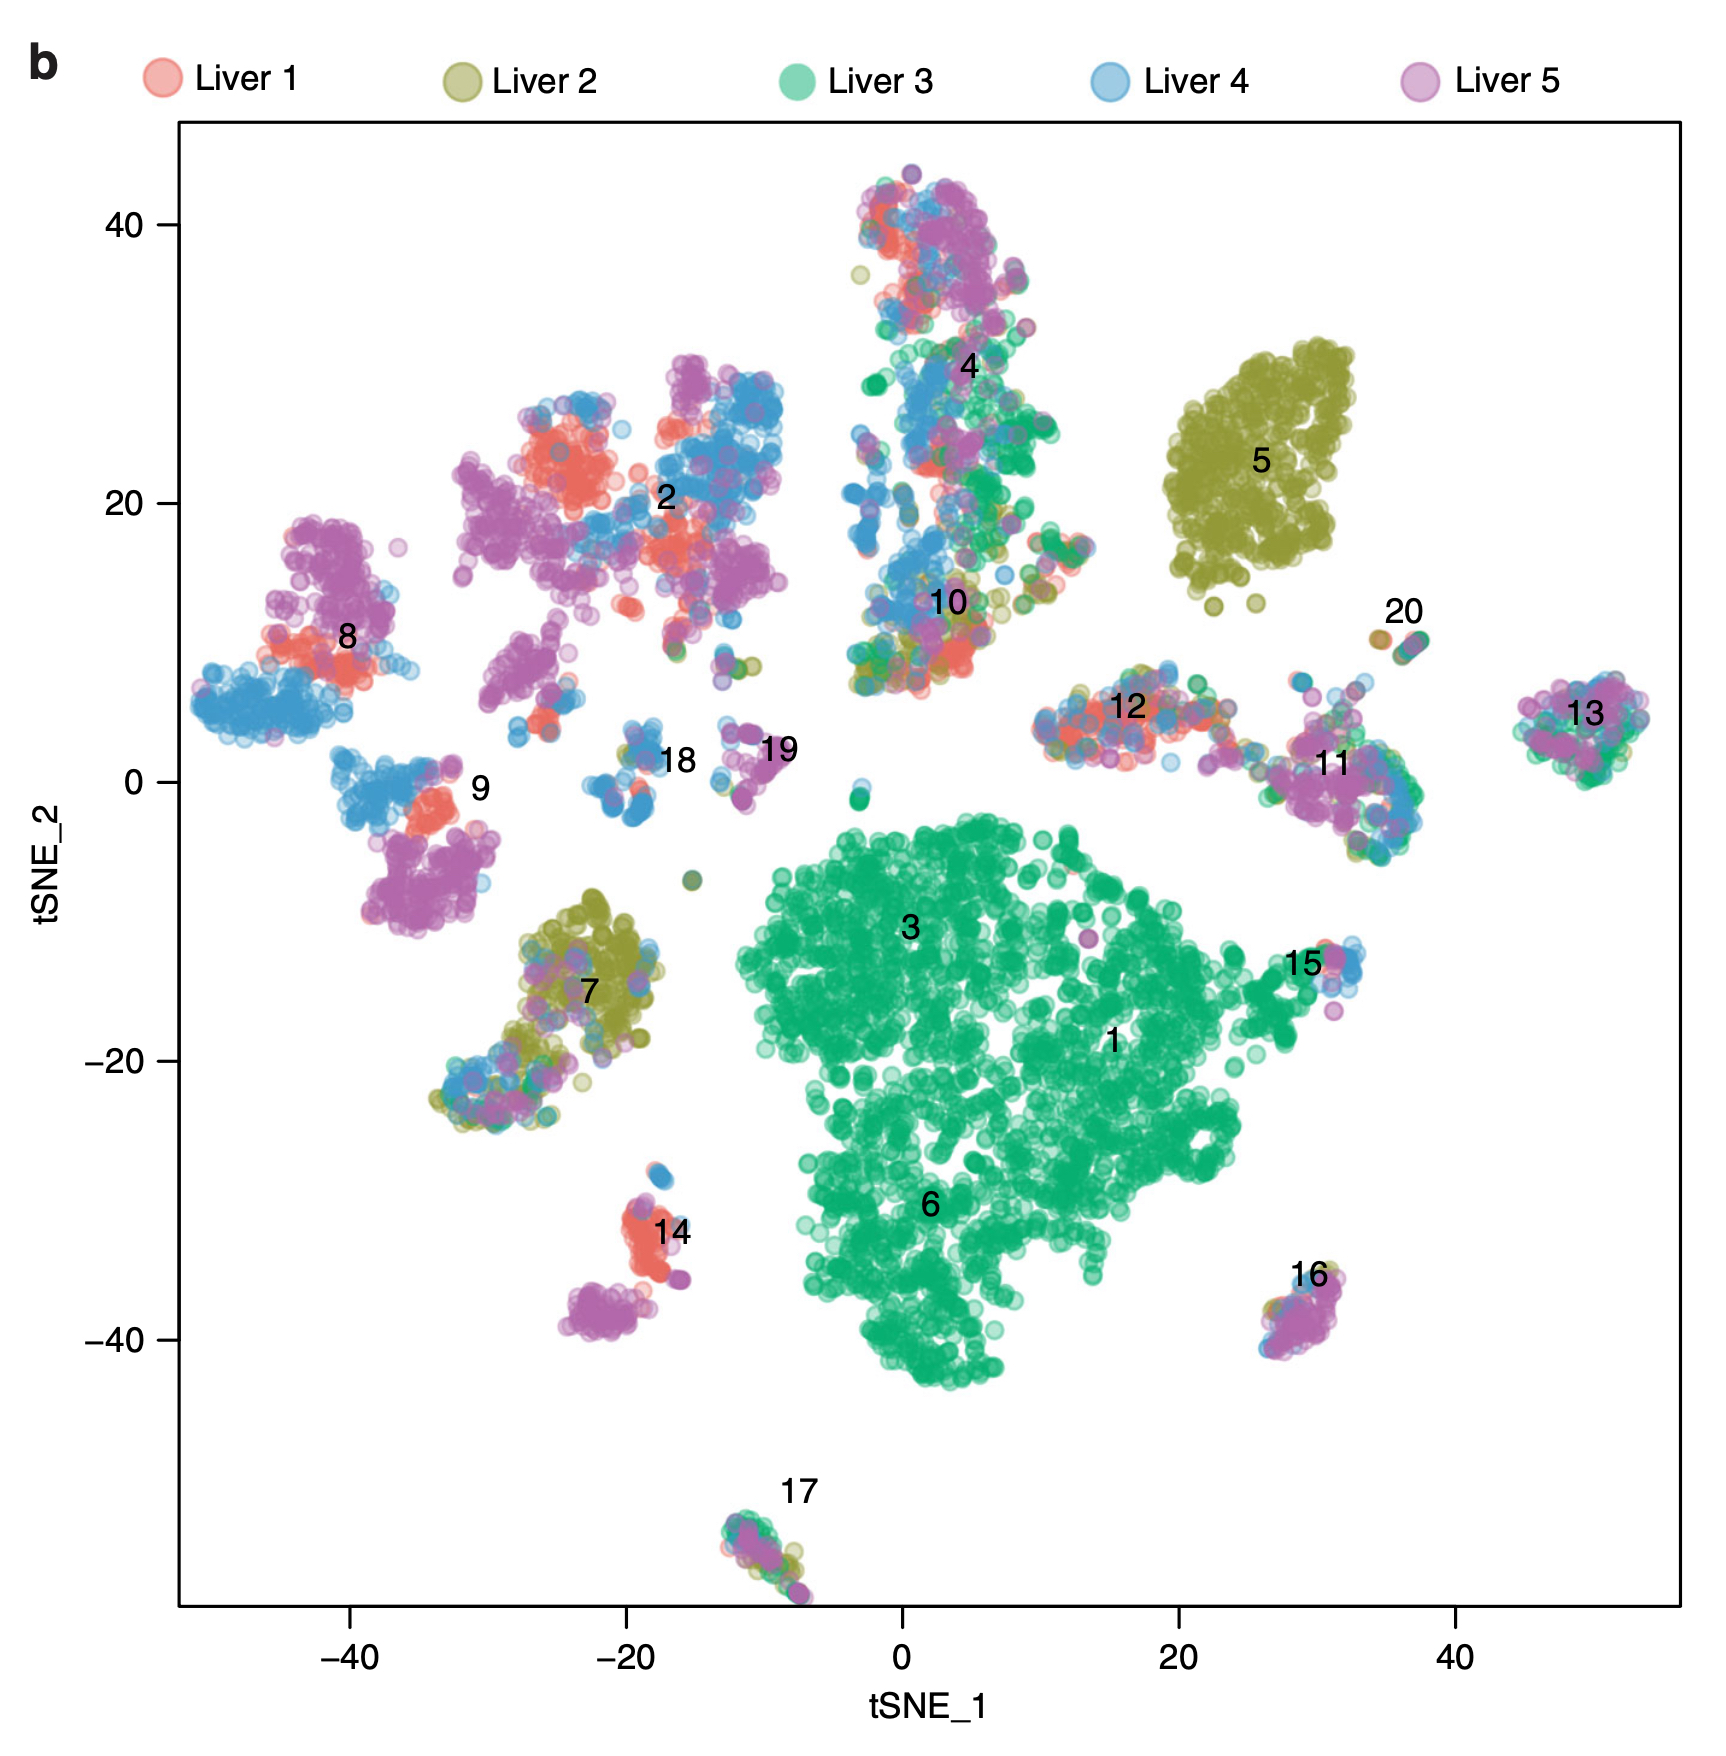 t-SNE Plot of Liver Cell
Clusters